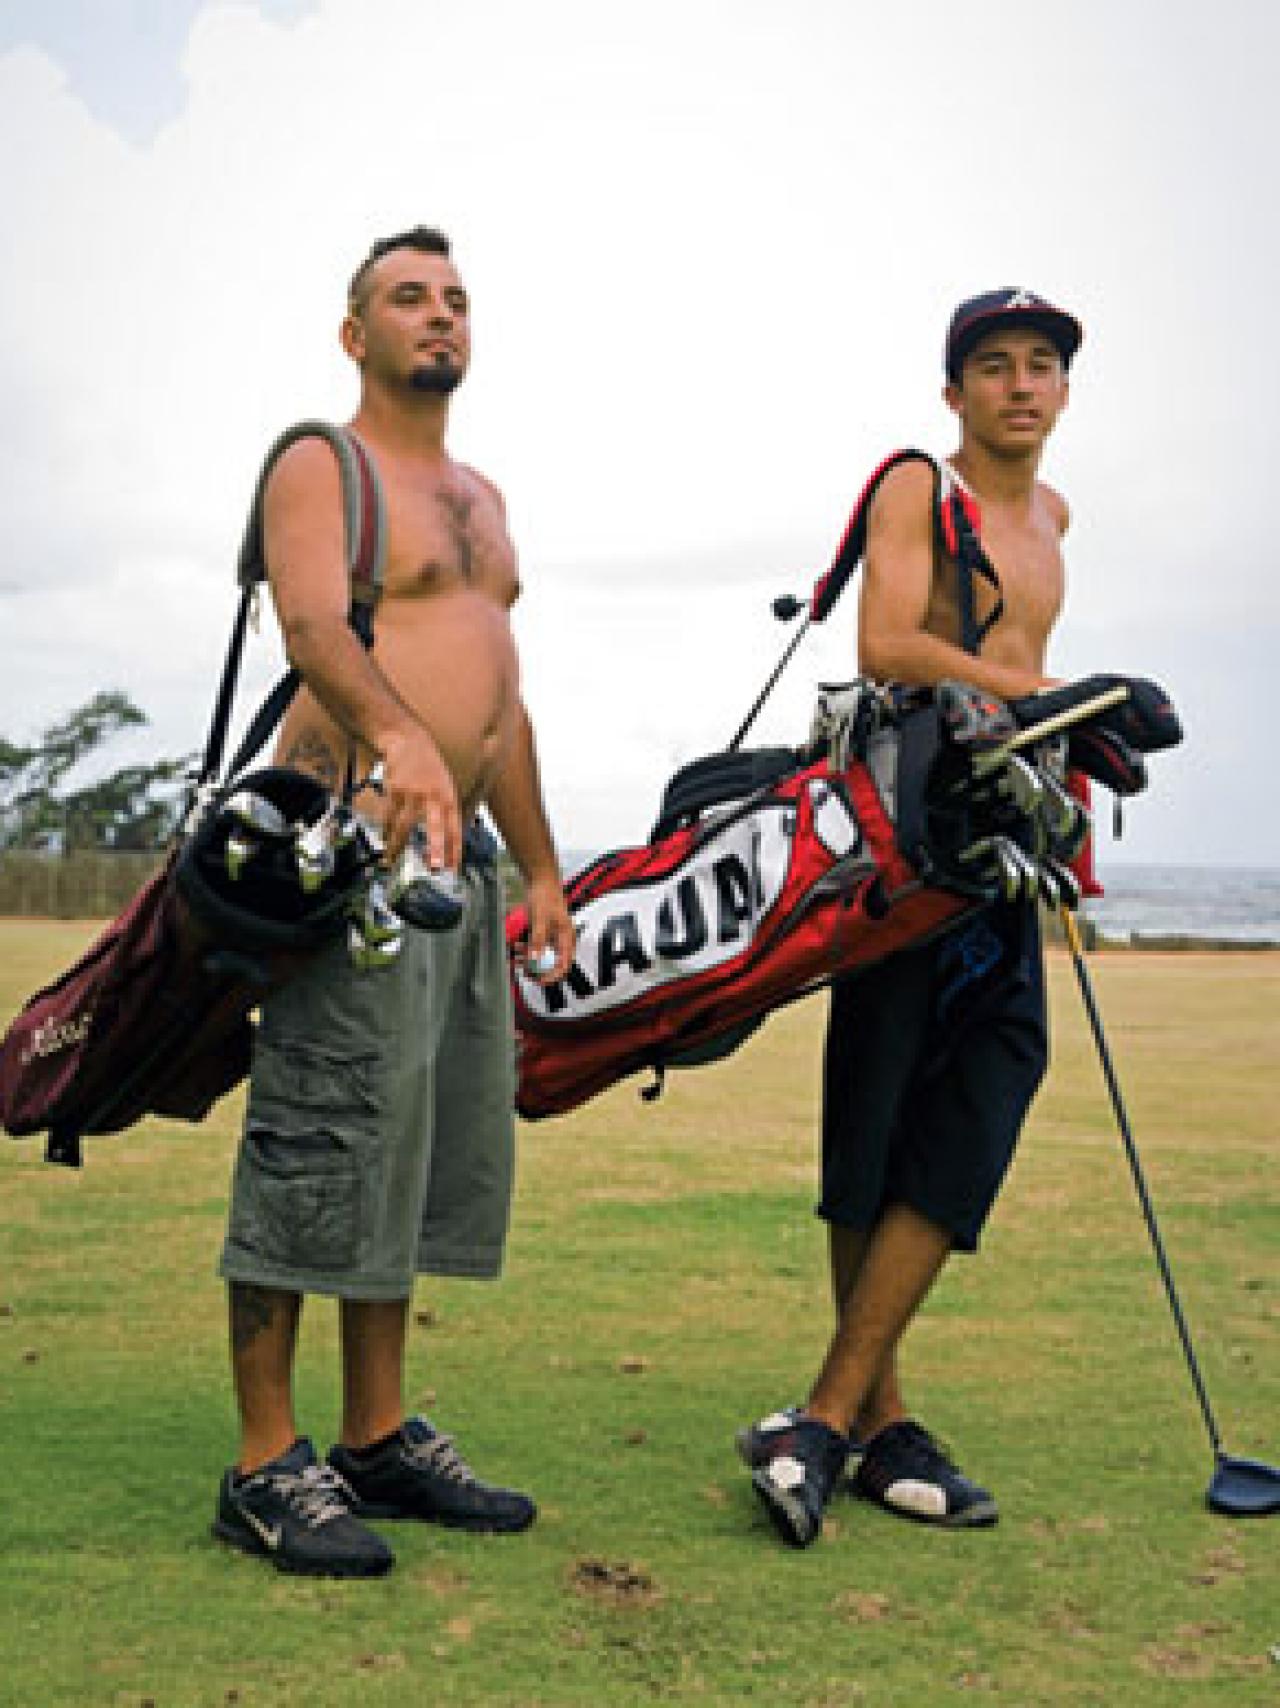 Play Golf Naked